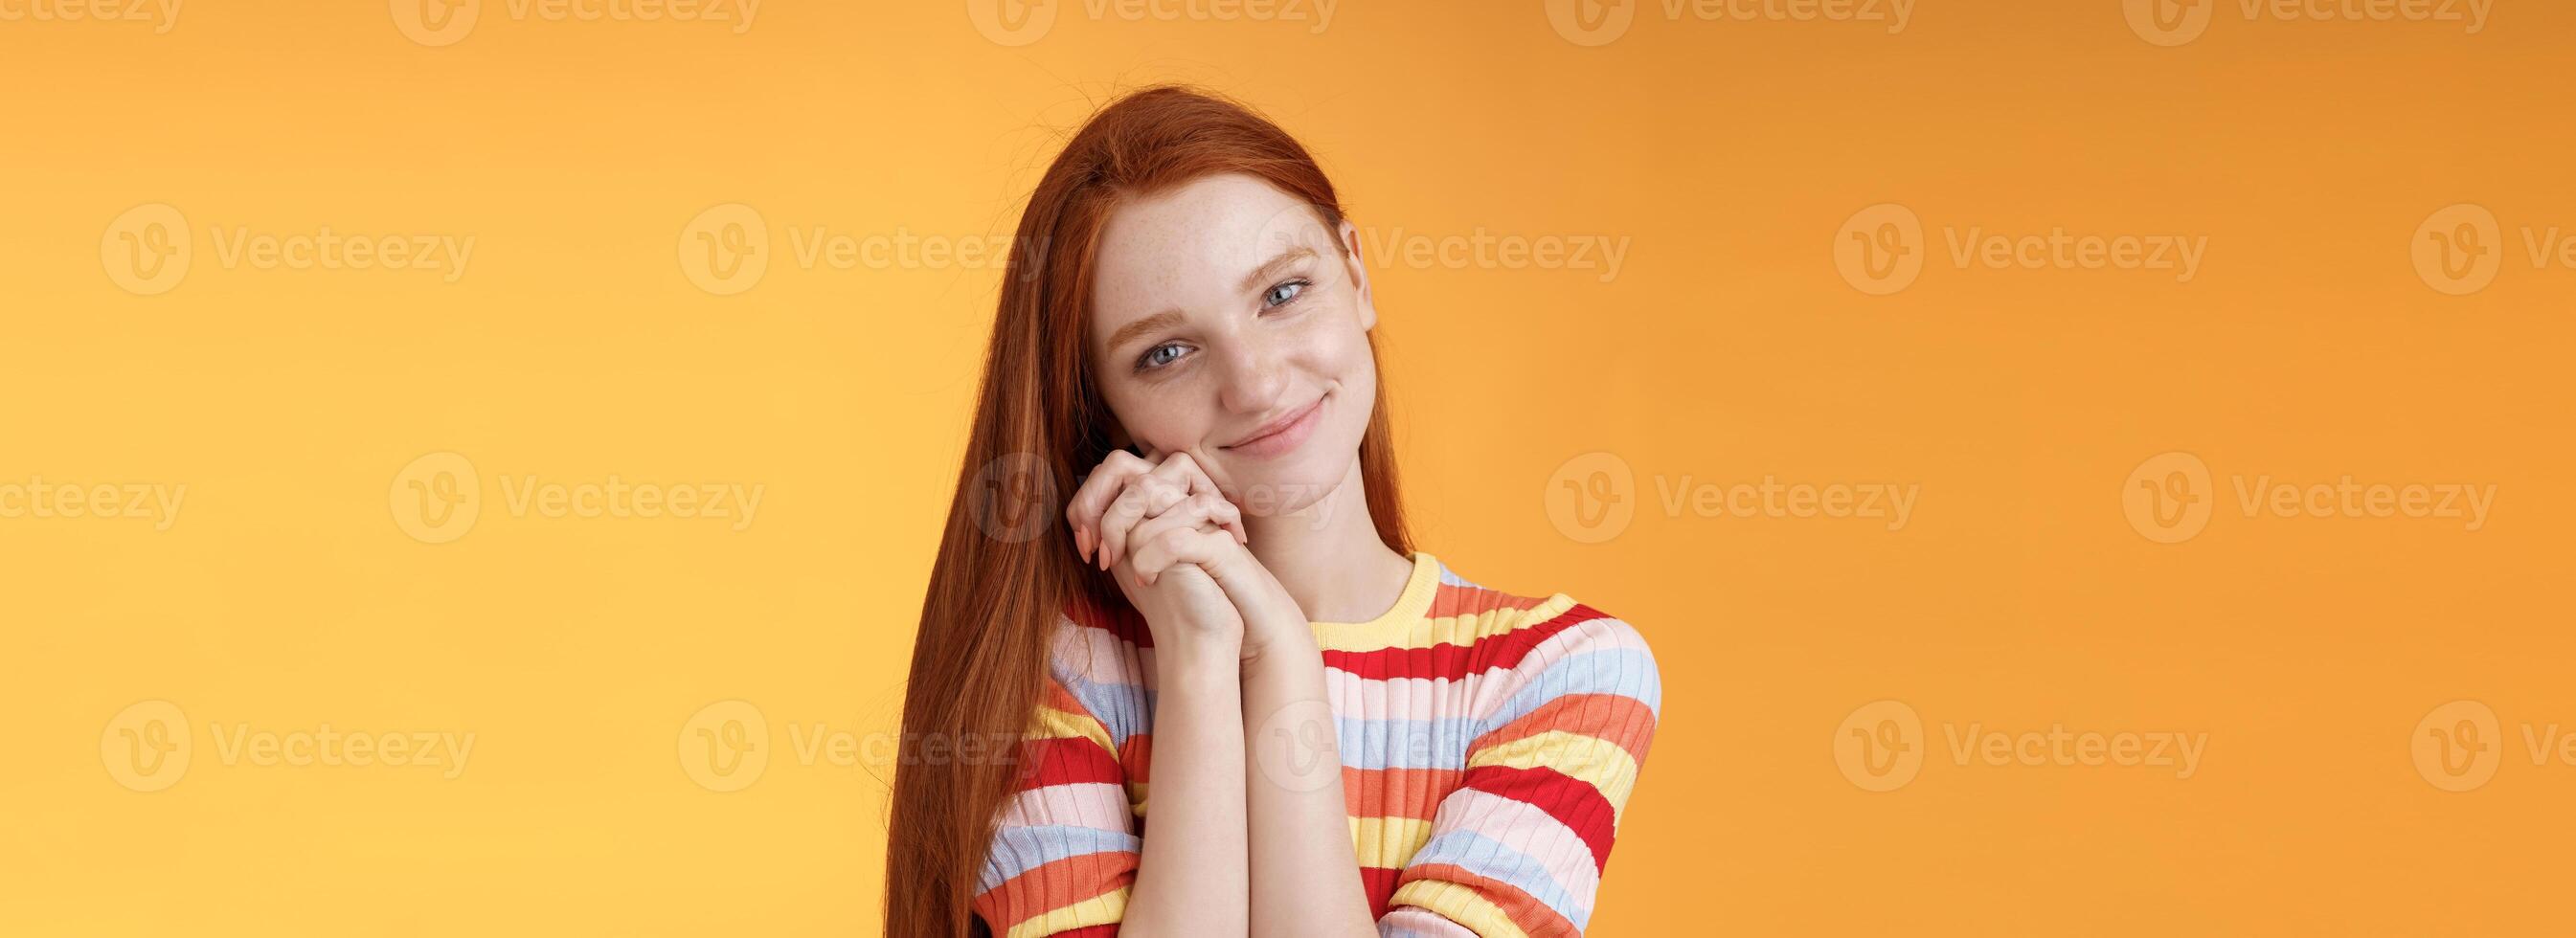 Dreamy sensual romantic young passionate redhead girlfriend melt heart feel sympathy joy receive sweet tender present lean palms smiling grateful gladly accept nice lovely gift, orange background photo